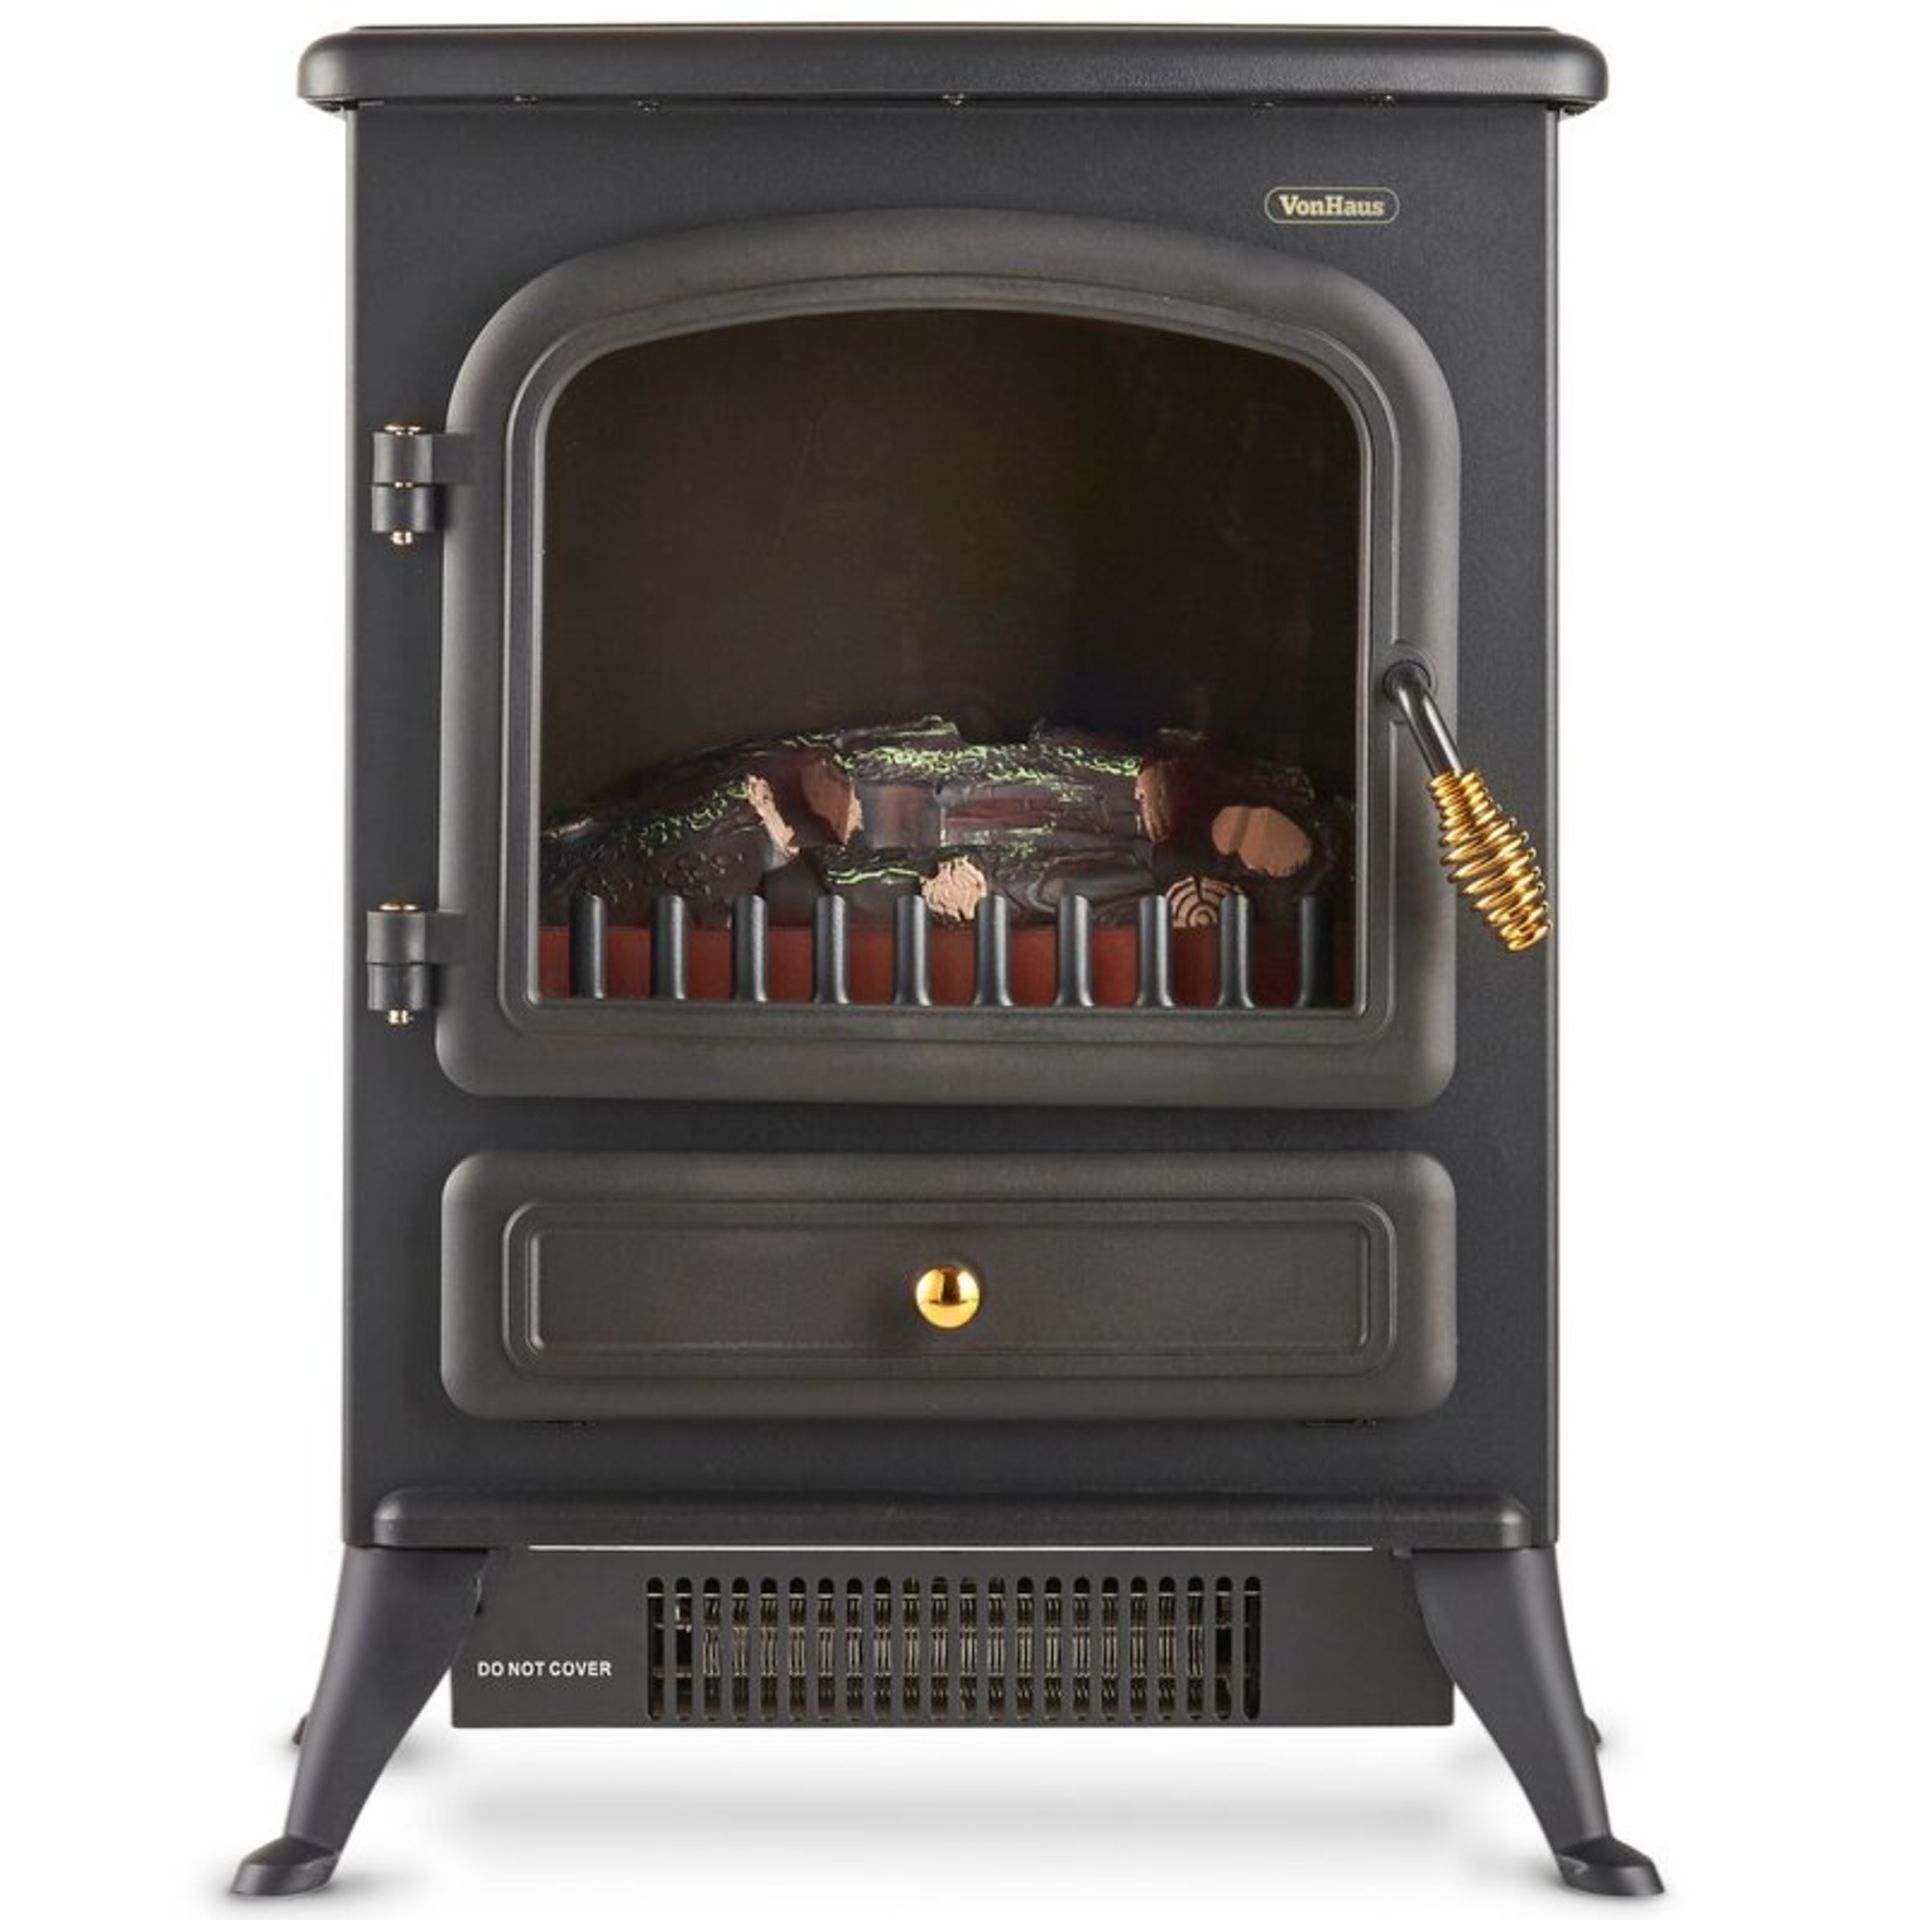 Sonny Electric Stove by VonHaus - Image 2 of 4